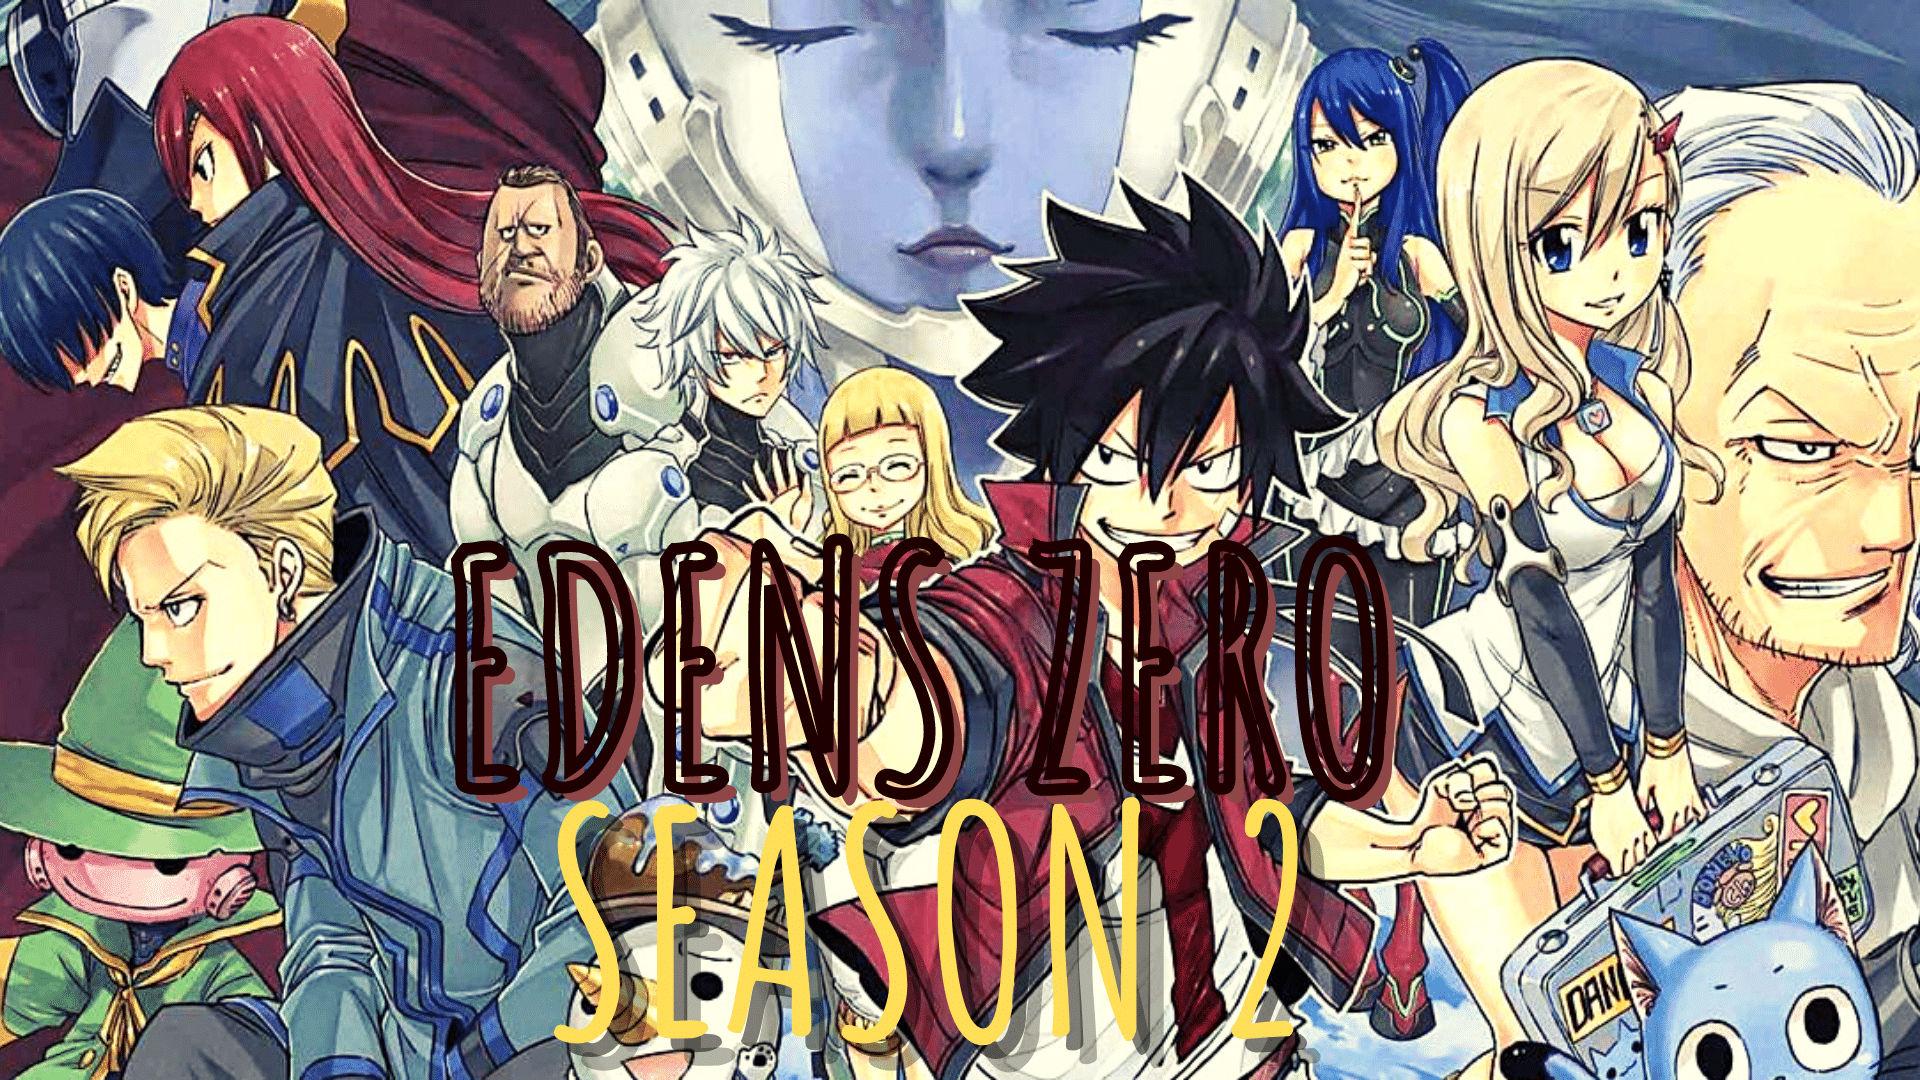 Season 2 Of ‘Edens Zero’ To Release On Netflix Soon: Here Is All To Know